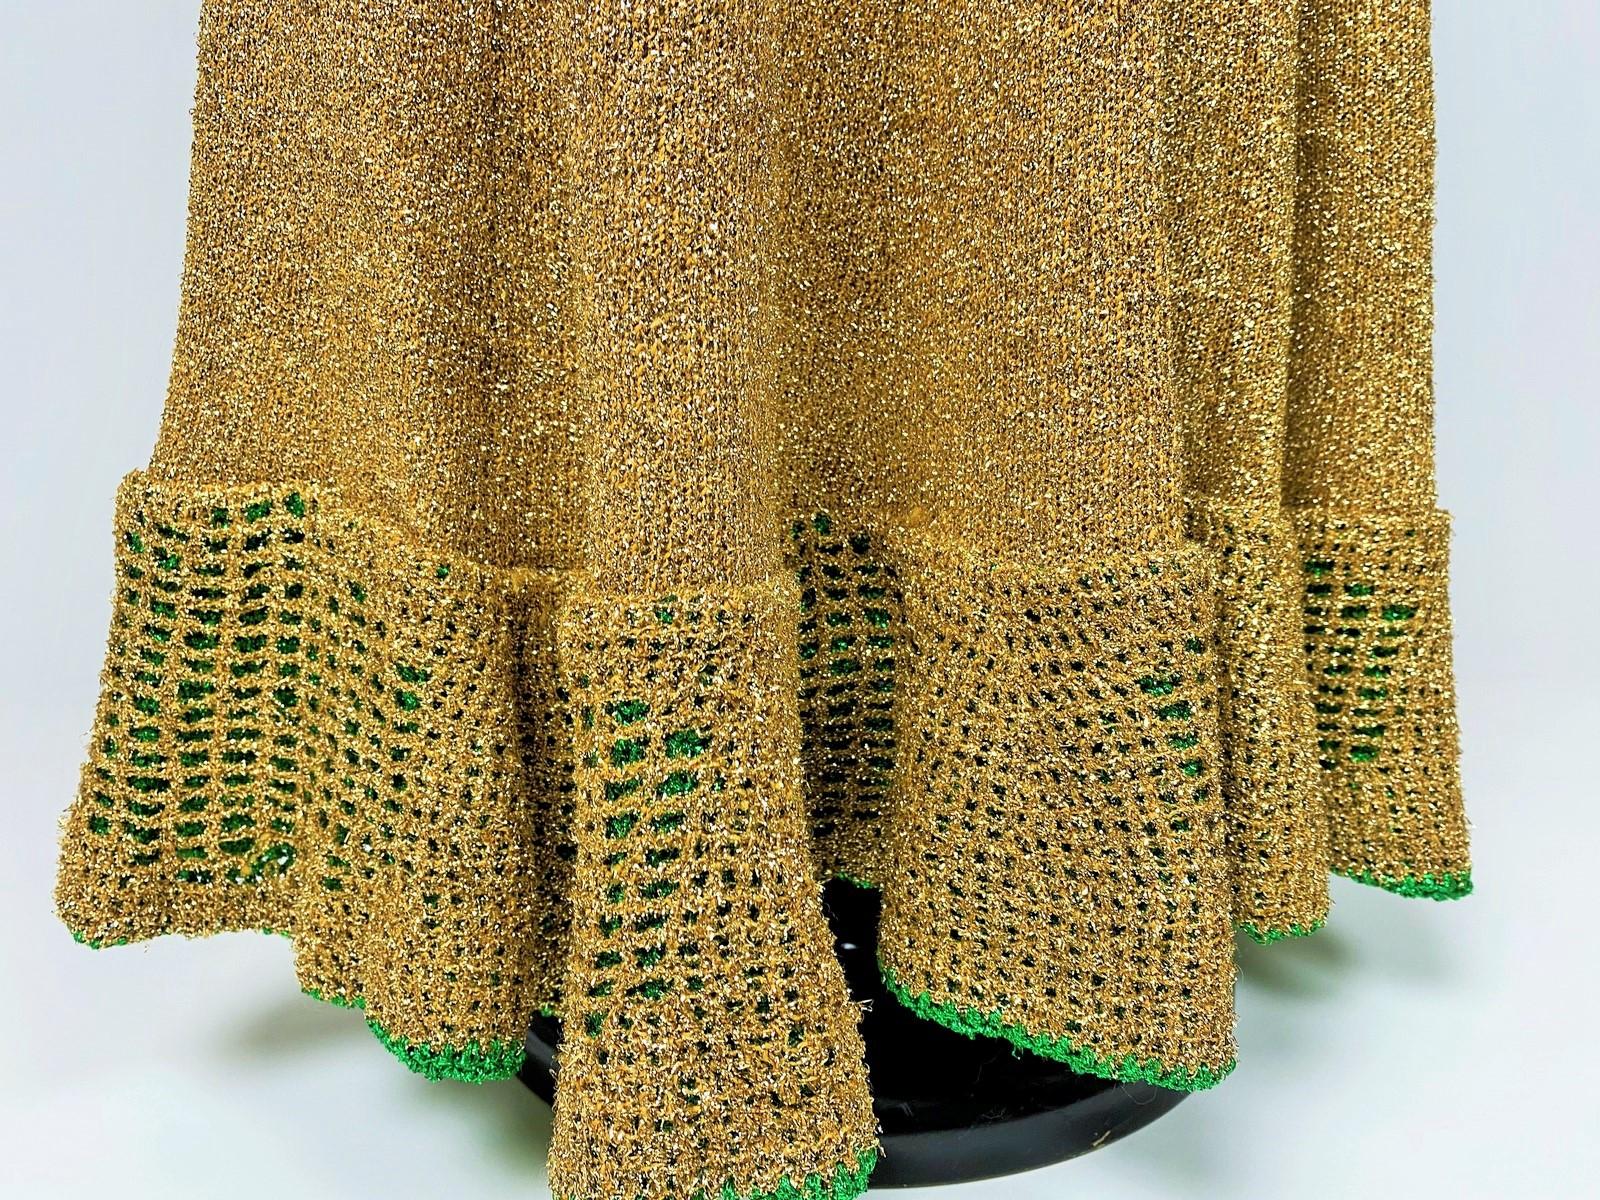 A Gold and Green Lurex knitwear Party Dress - France Circa 1970 For Sale 11